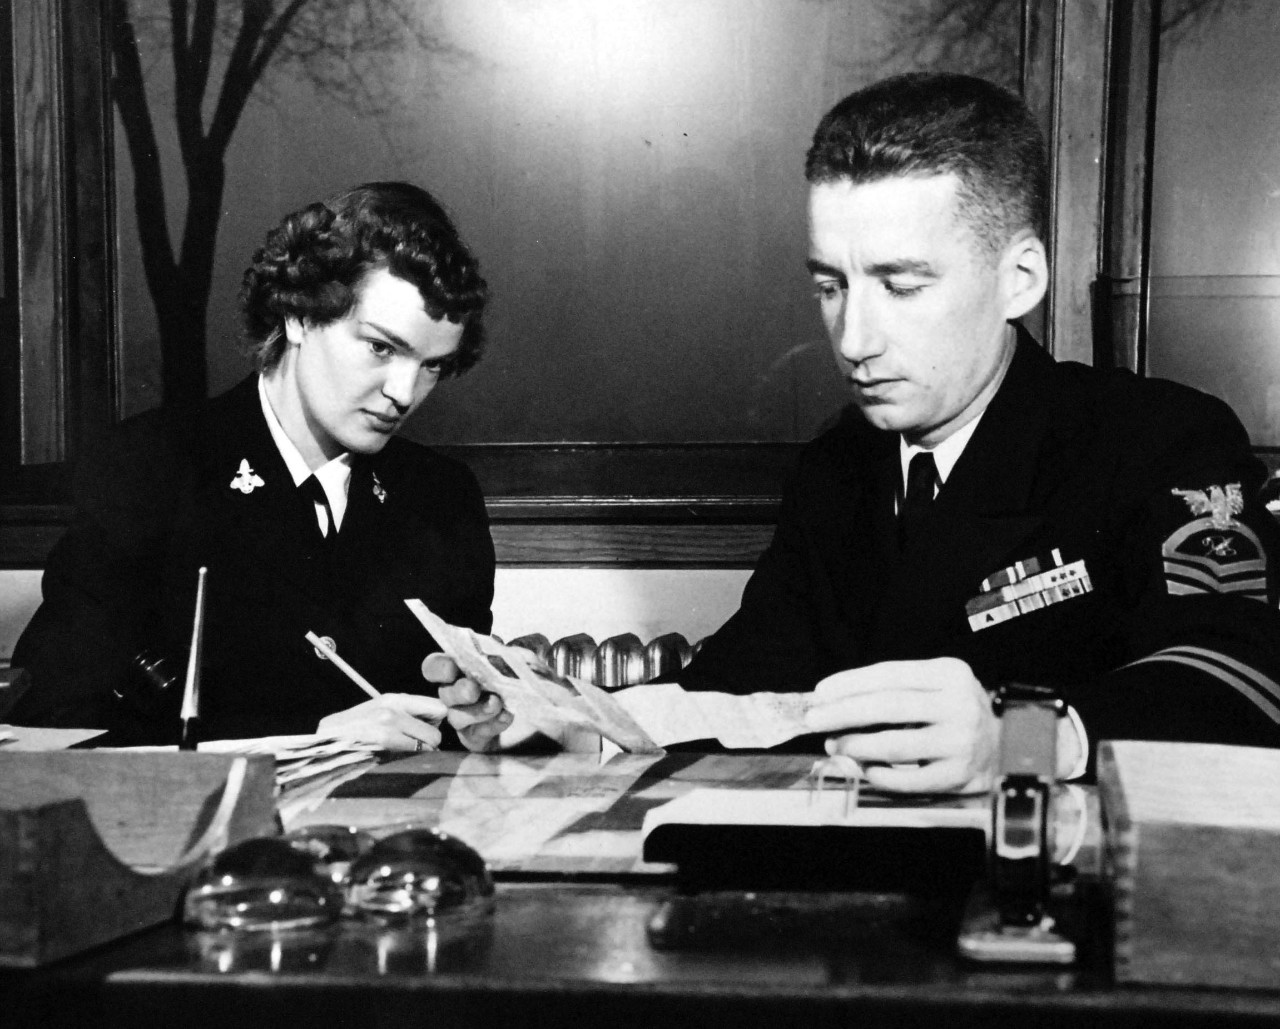 80-G-428485:   WAVES at Fleet Hometown News Center, Naval Training Center, Great Lakes, Illinois, May 1951.    Seaman Apprentice Naydean Remmerts (left) gets some practical information from Chief Journalist Frank J. Madden, USN.   Official U.S. Navy photograph, now in the collections of the National Archives. 